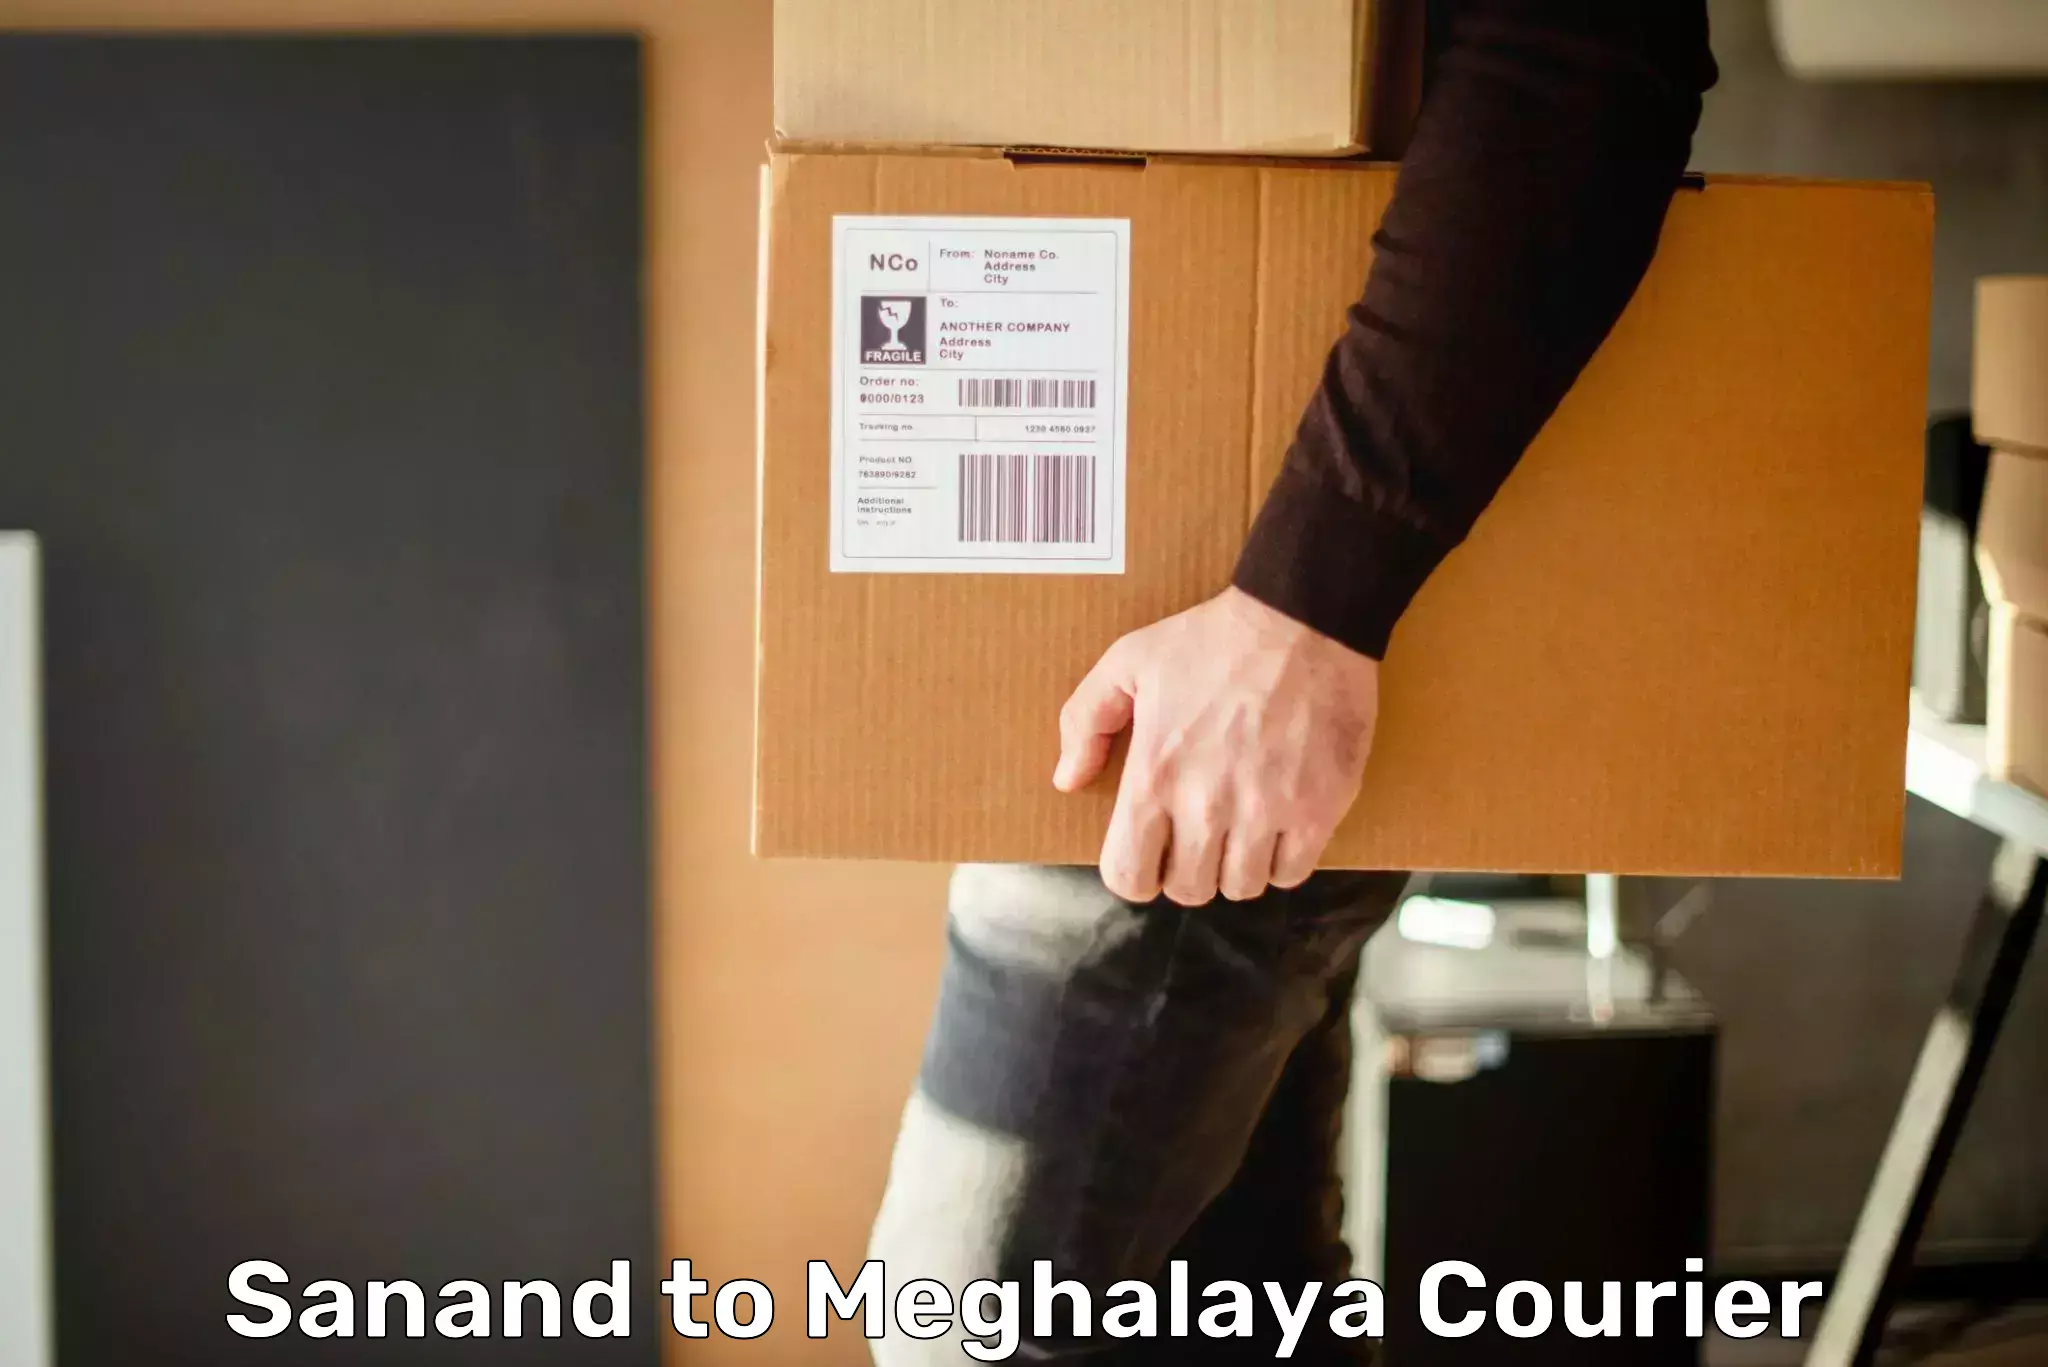 Subscription-based courier Sanand to Meghalaya